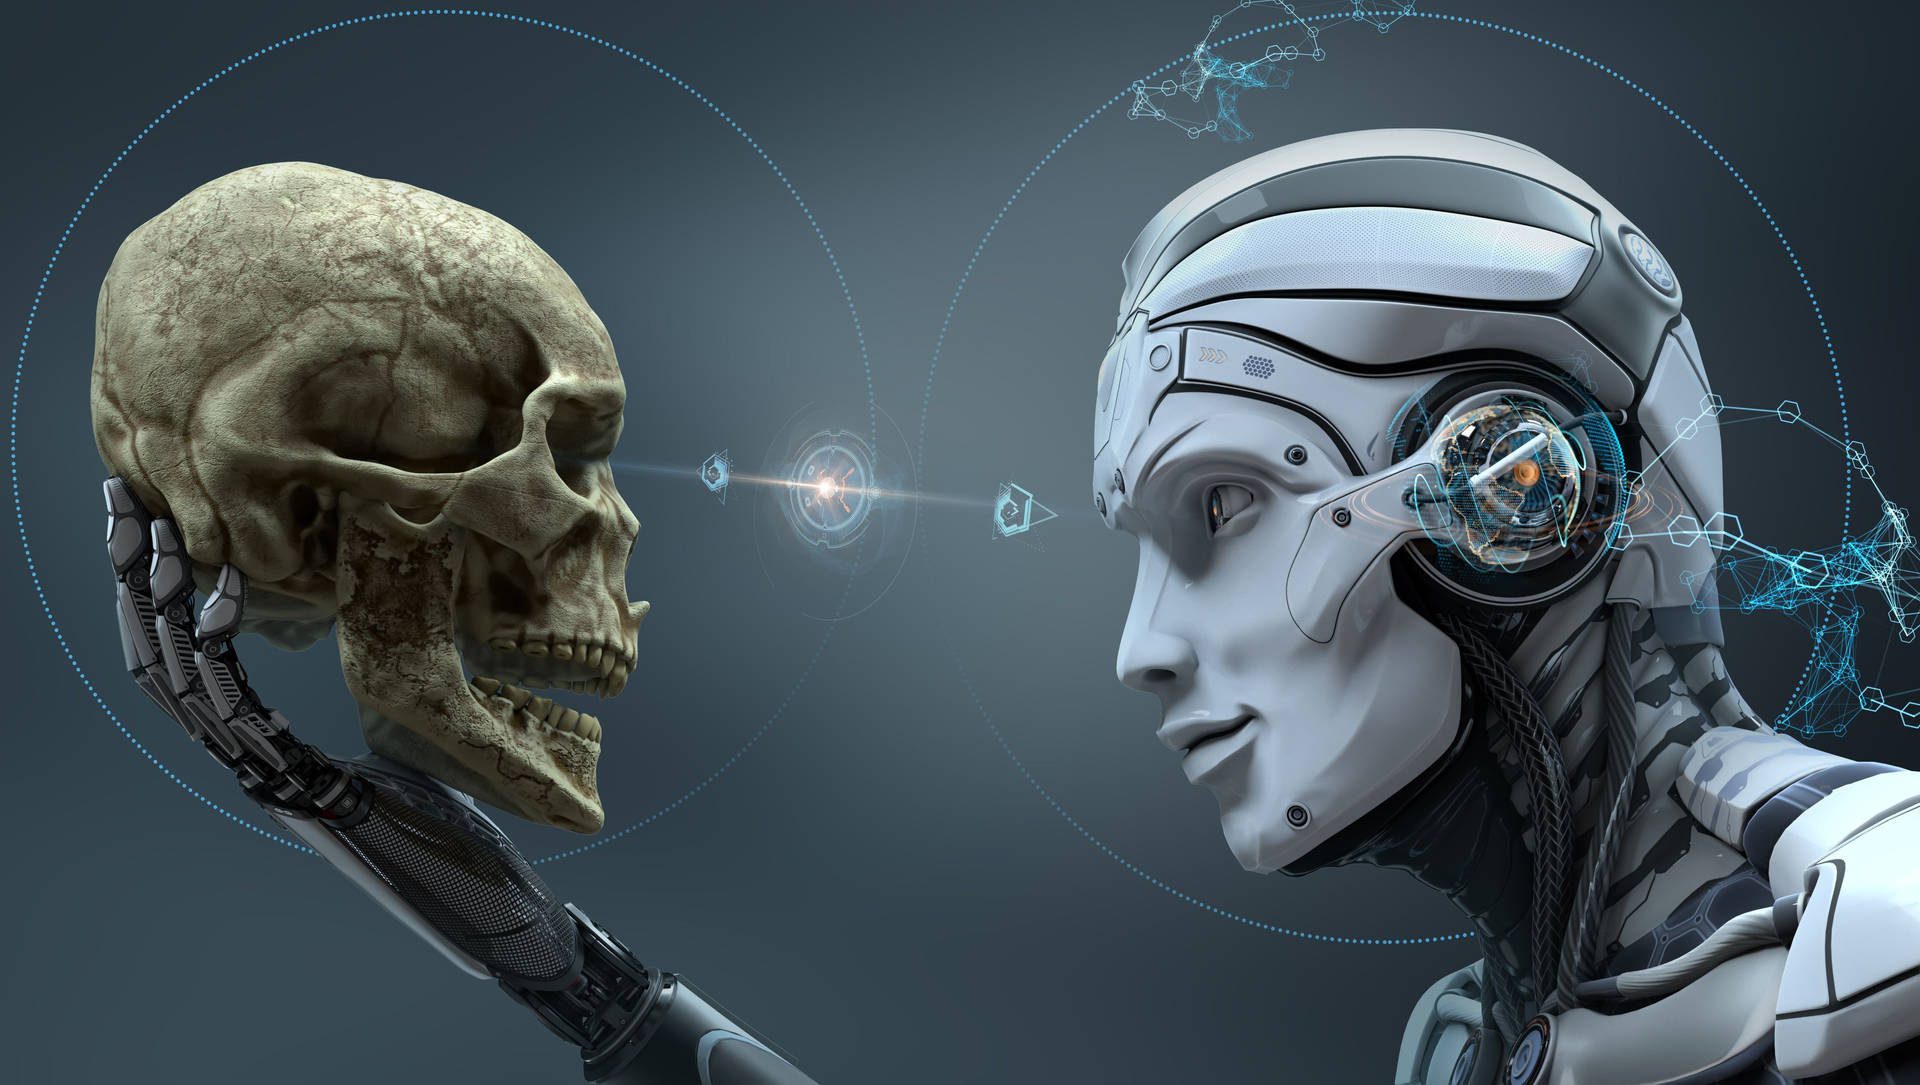 Humanoid Robot And Skull Background